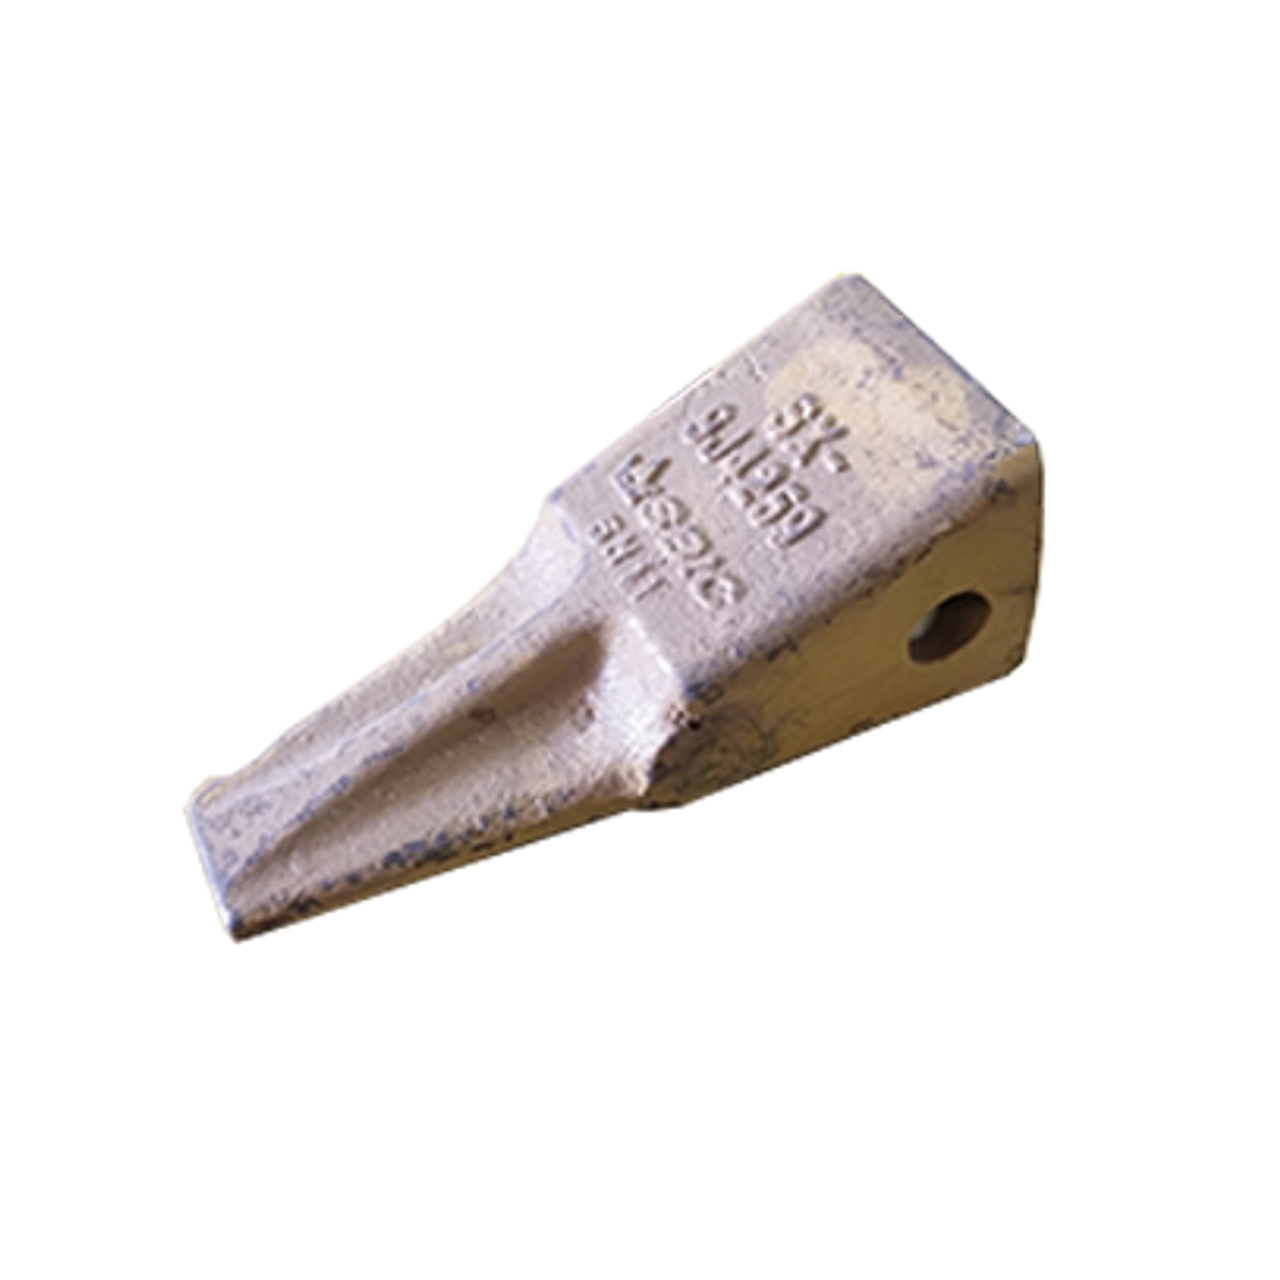 GT 3252-9542 - CAT 953C Penetration Tooth